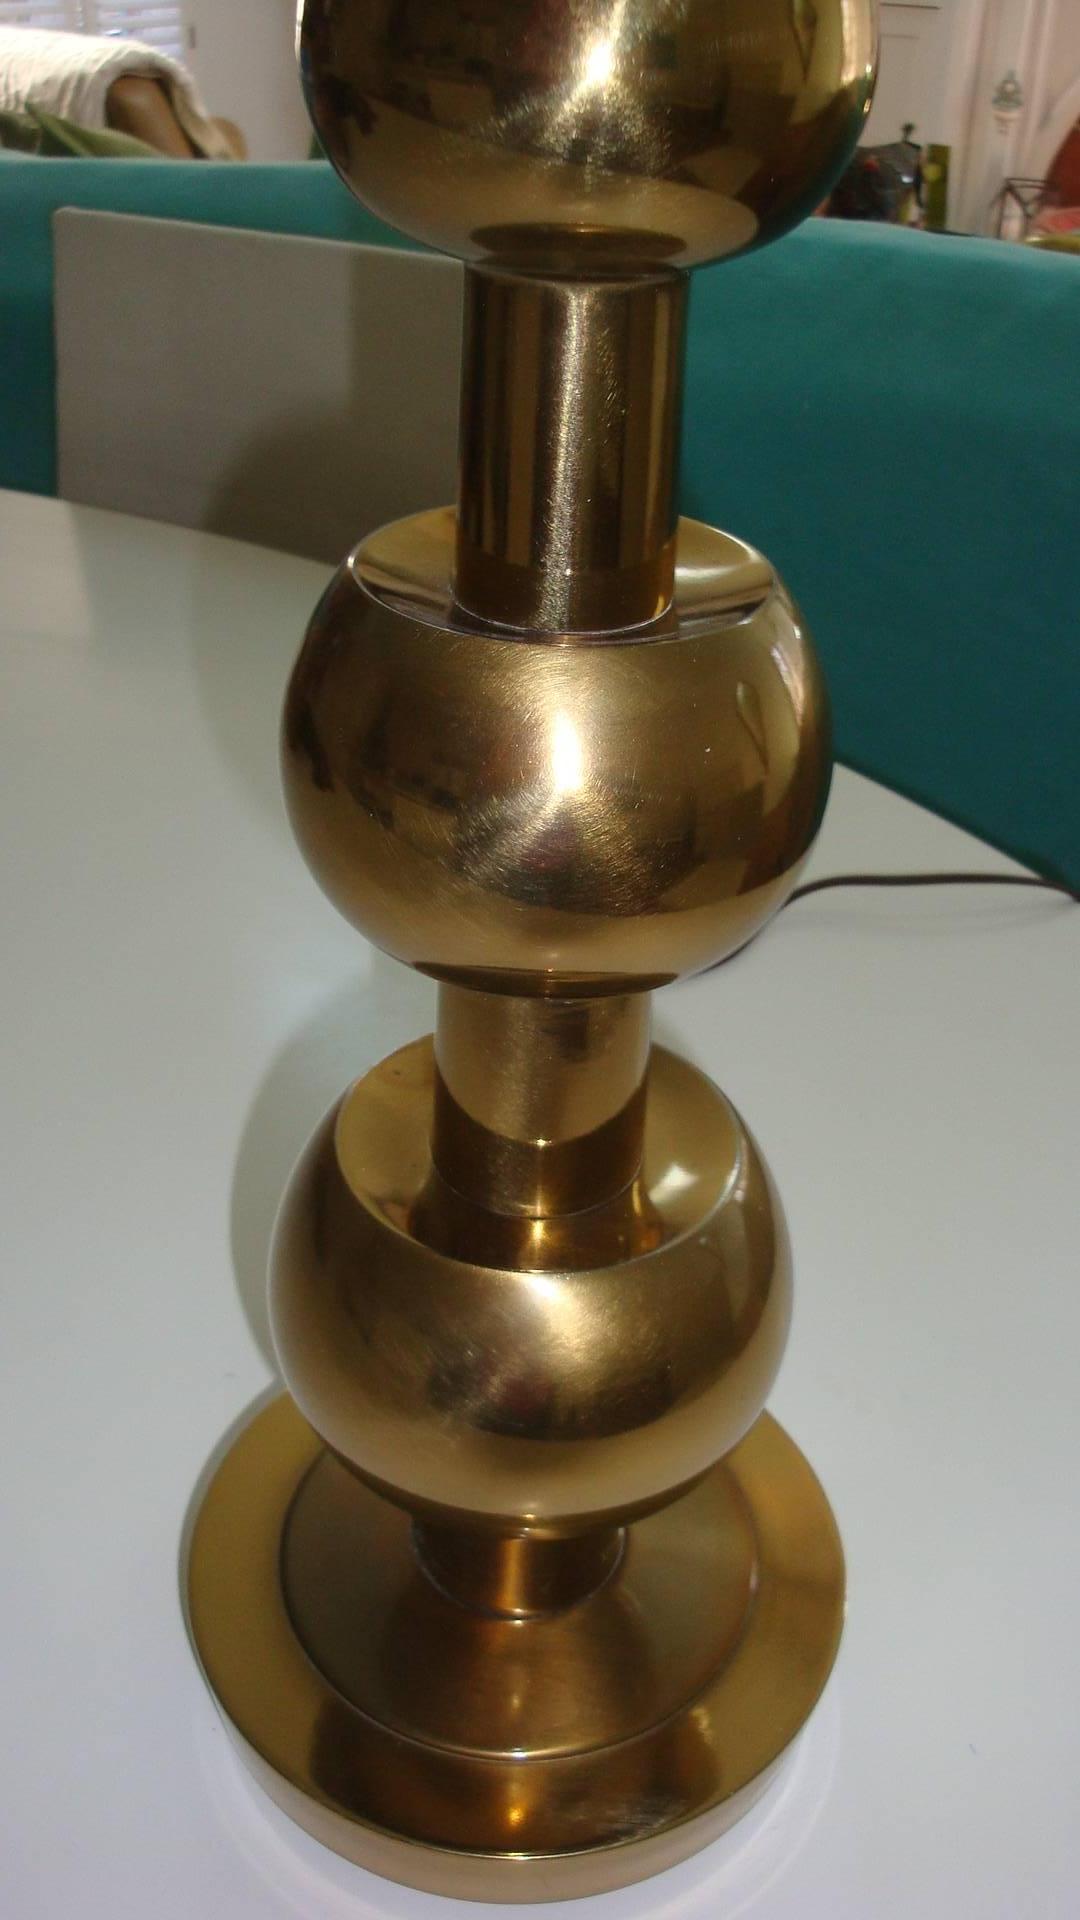 This is a vintage three round ball brass lamp from the 1950s-1960s its made by Stiffel.